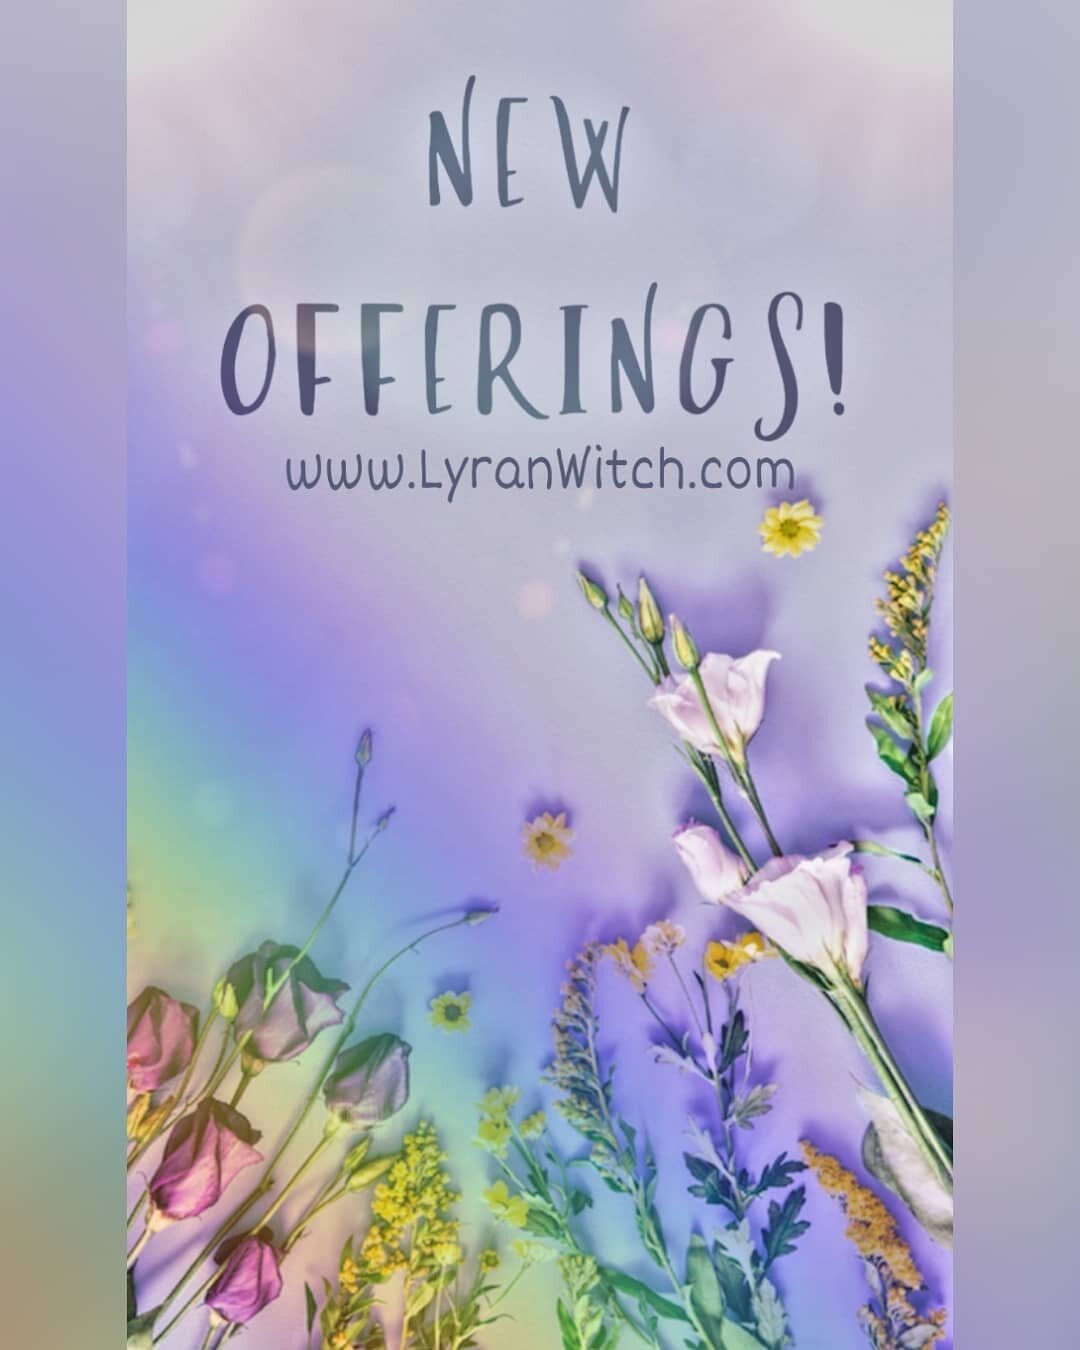 I've been working hard behind the scenes &amp; am stoked to announce that I have A TON of new &amp; varied offerings! 

 🔮 I now offer live psychic readings specifically for love, finance/career, wellness, urgent messages from spirit guides, animal 